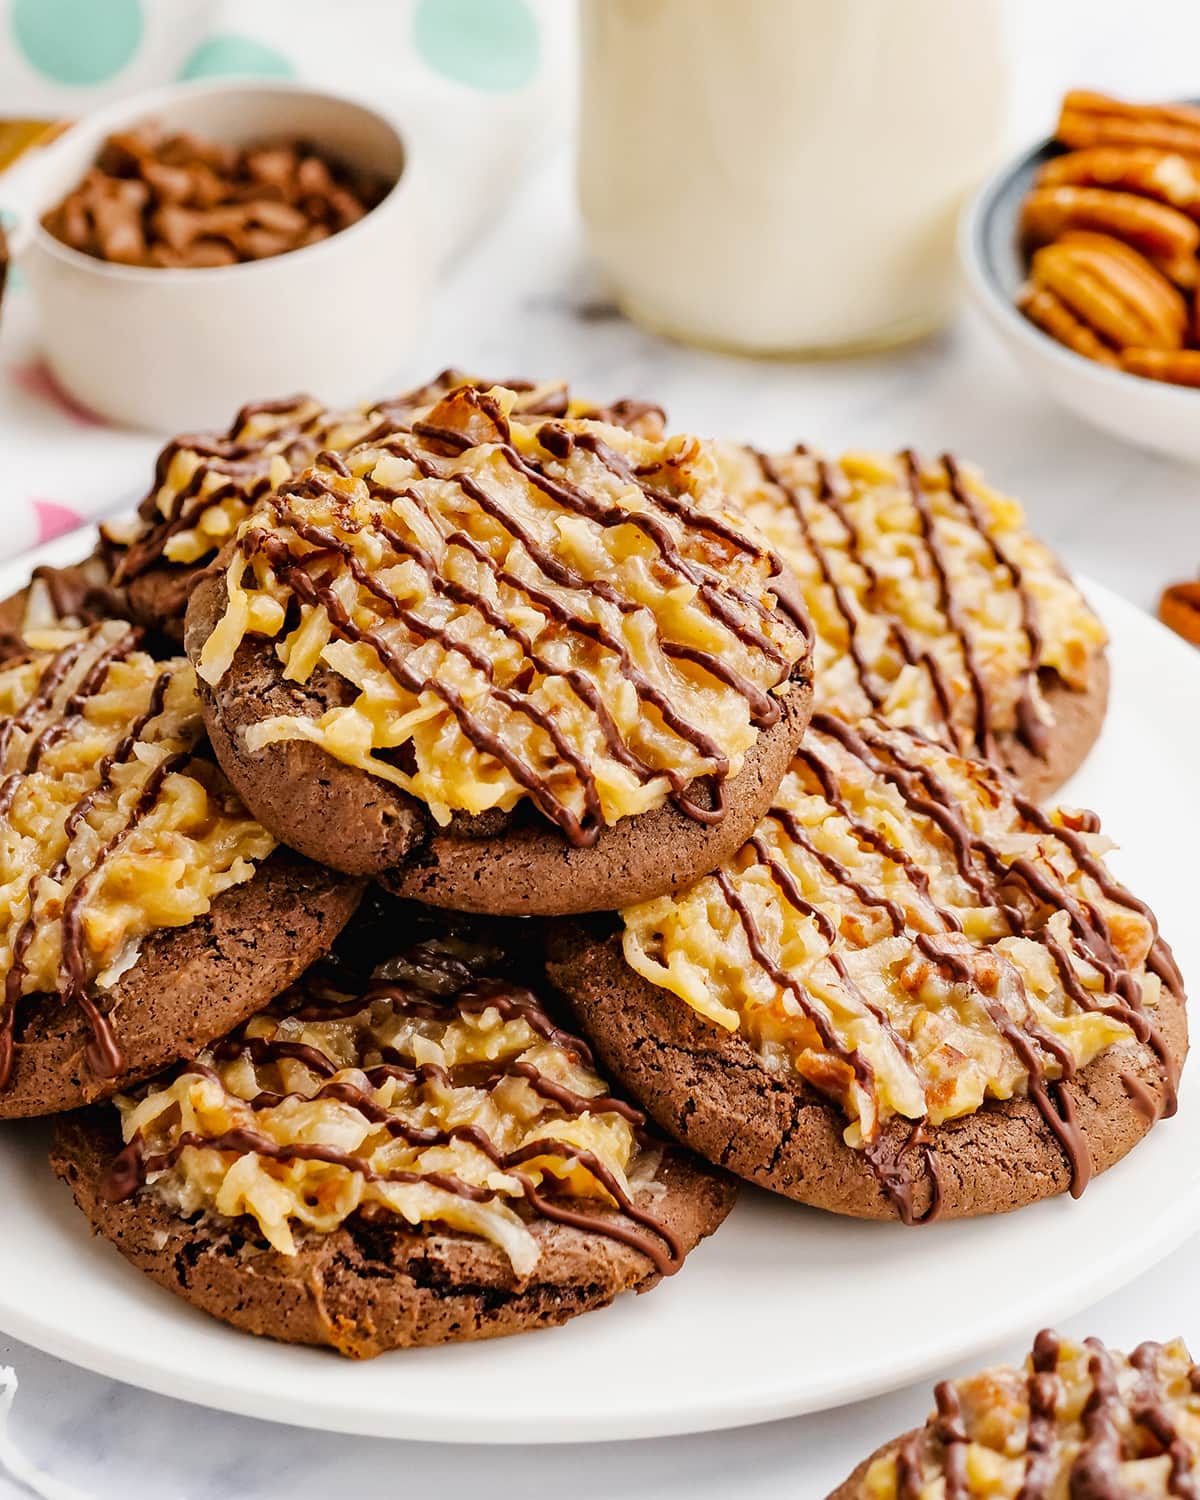 A pile of chocolate cookies topped with German chocolate coconut pecan frosting and a chocolate drizzle.